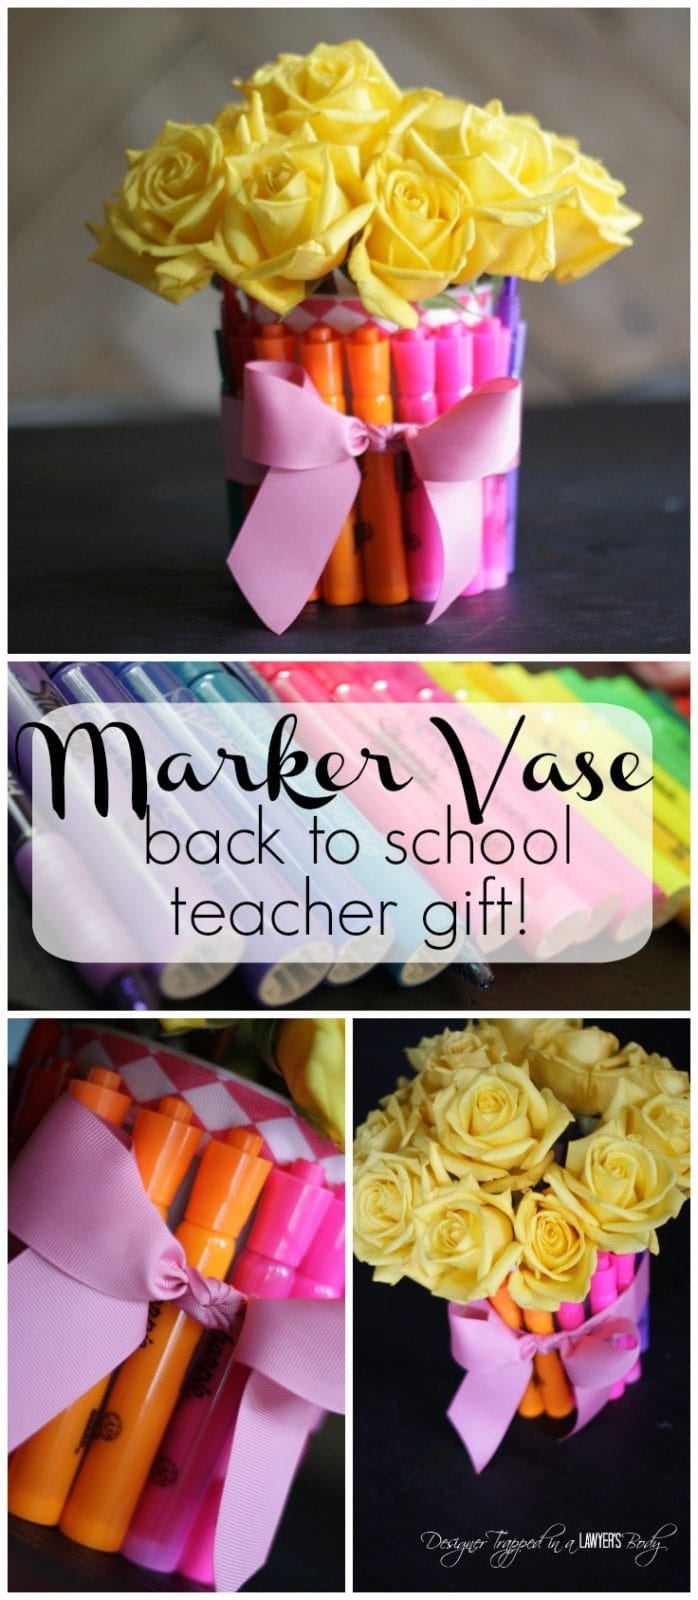 SO CUTE! DIY vase made from markers for back to school teacher gift! Full tutorial. #InspireStudents #TeachersChangeLives #pmedia #ad